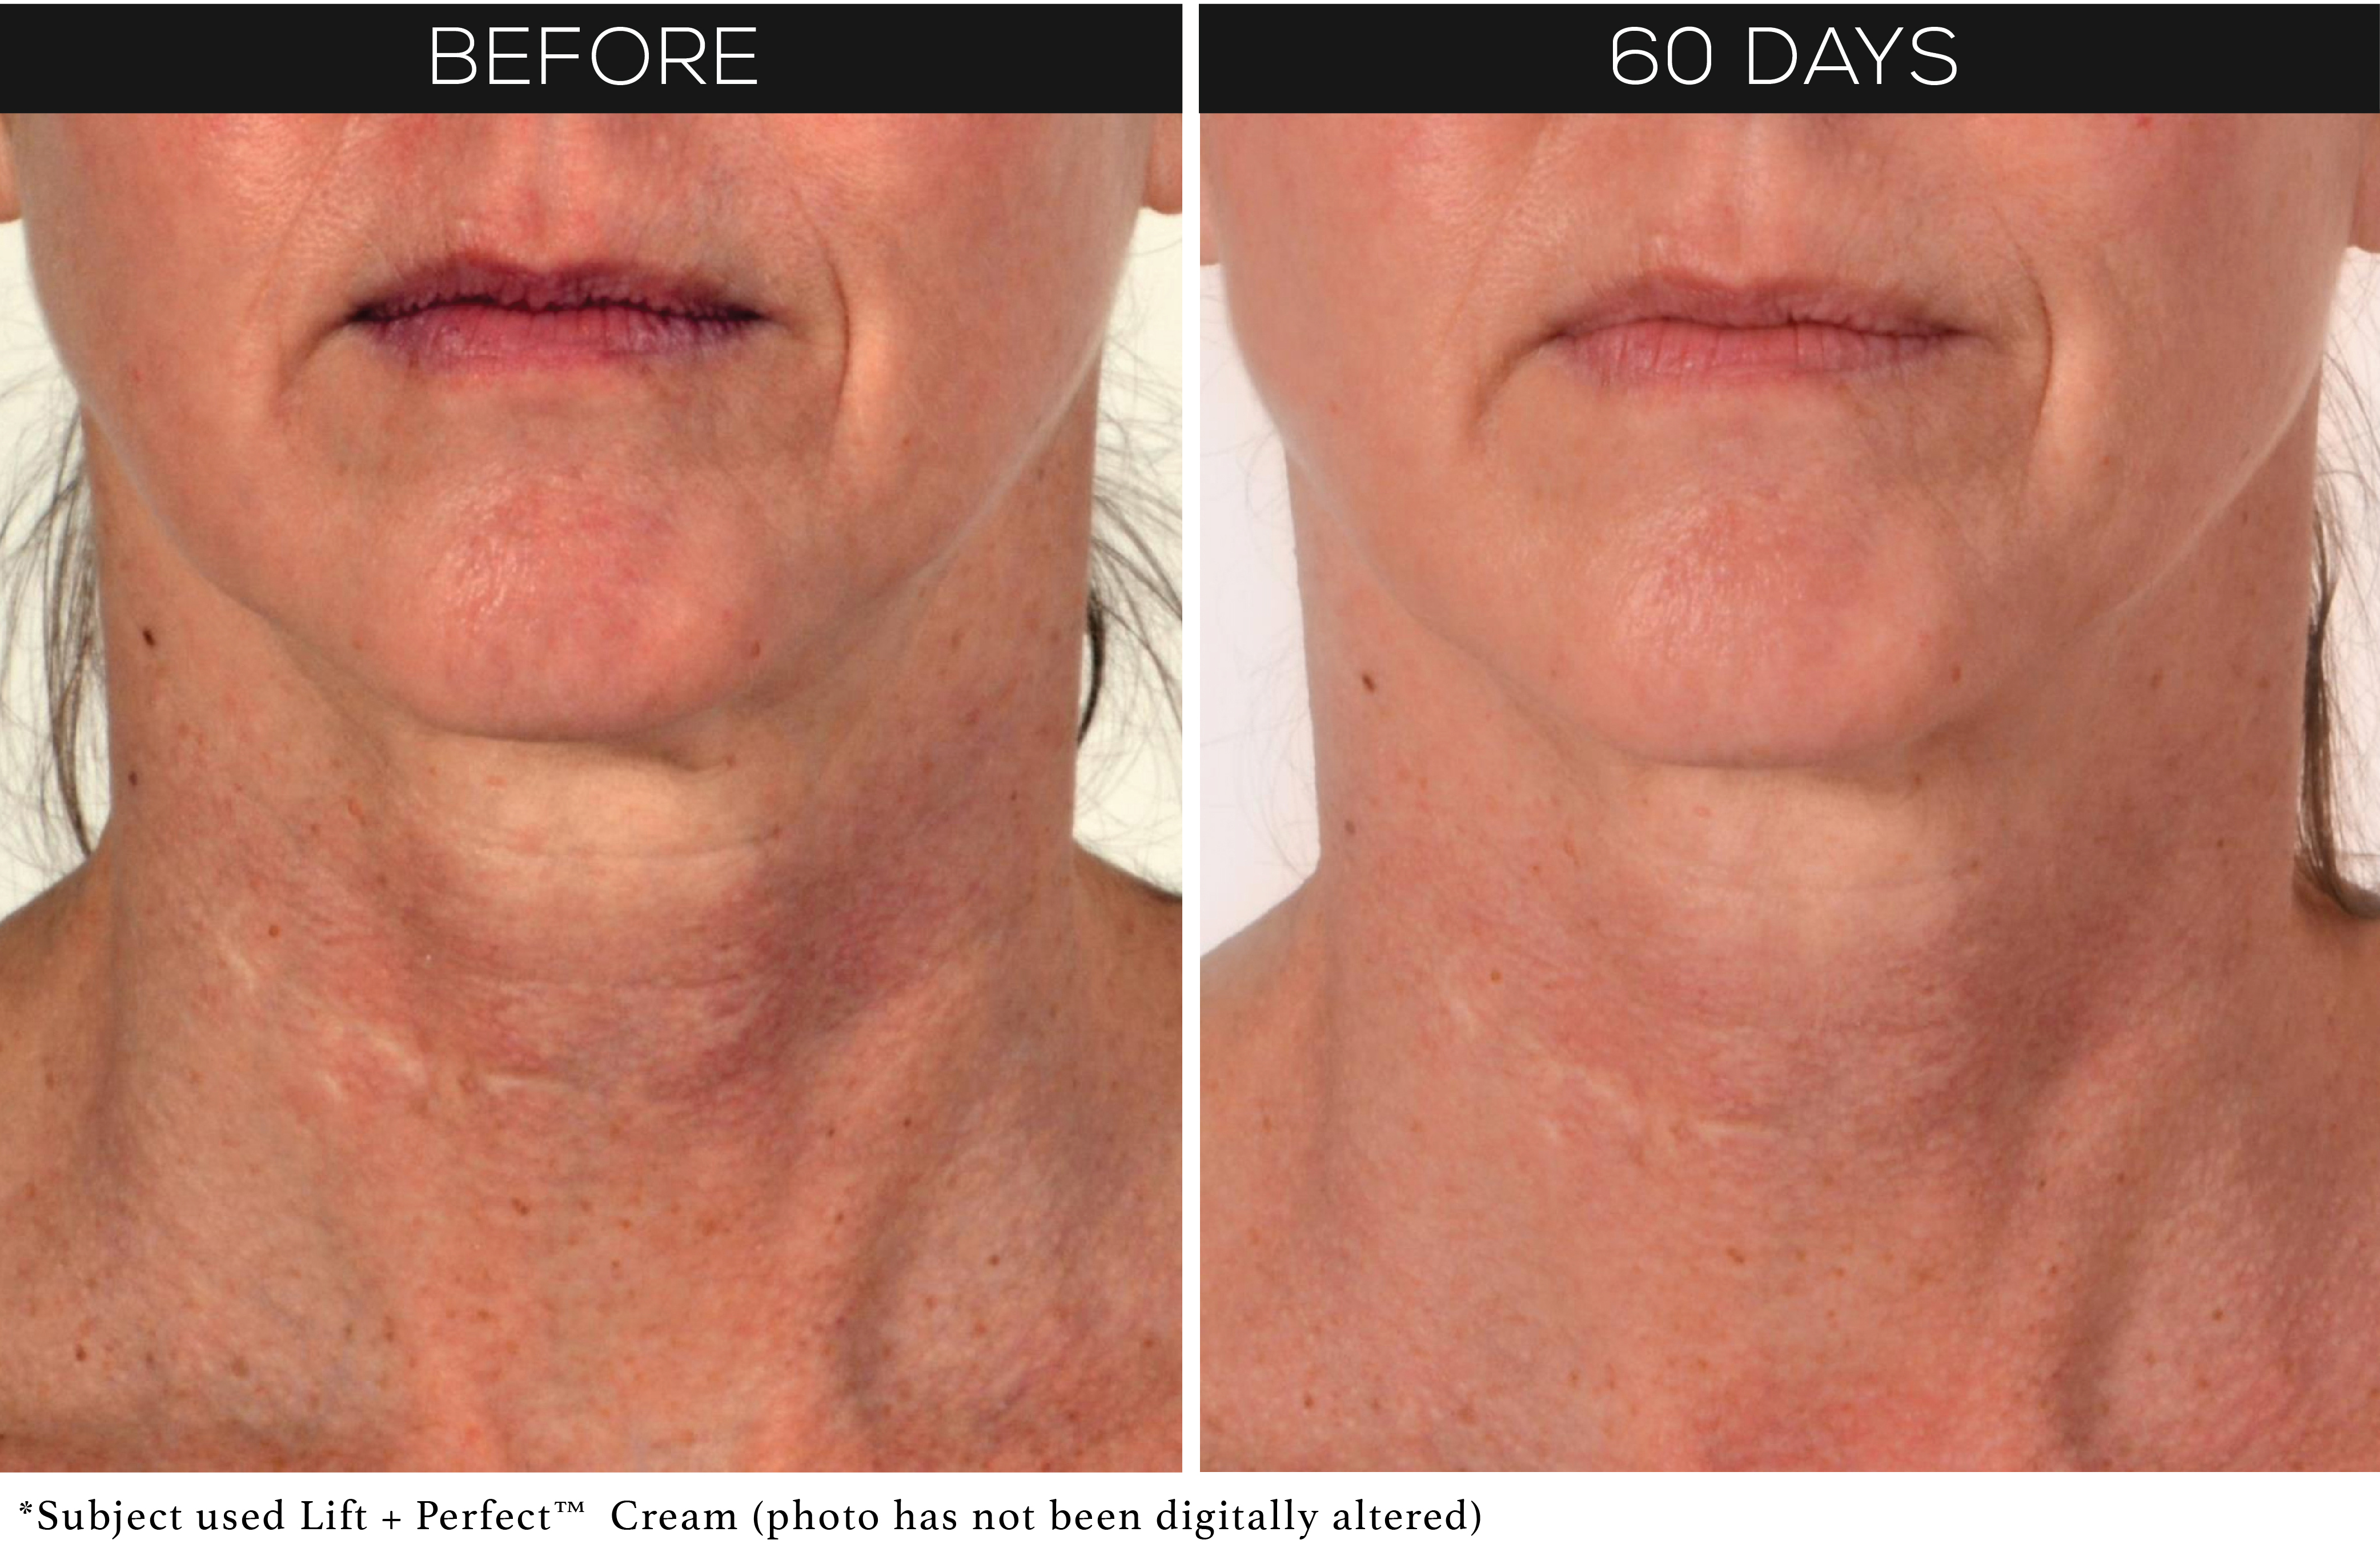 before-after-lift-perfect-neck2.jpg